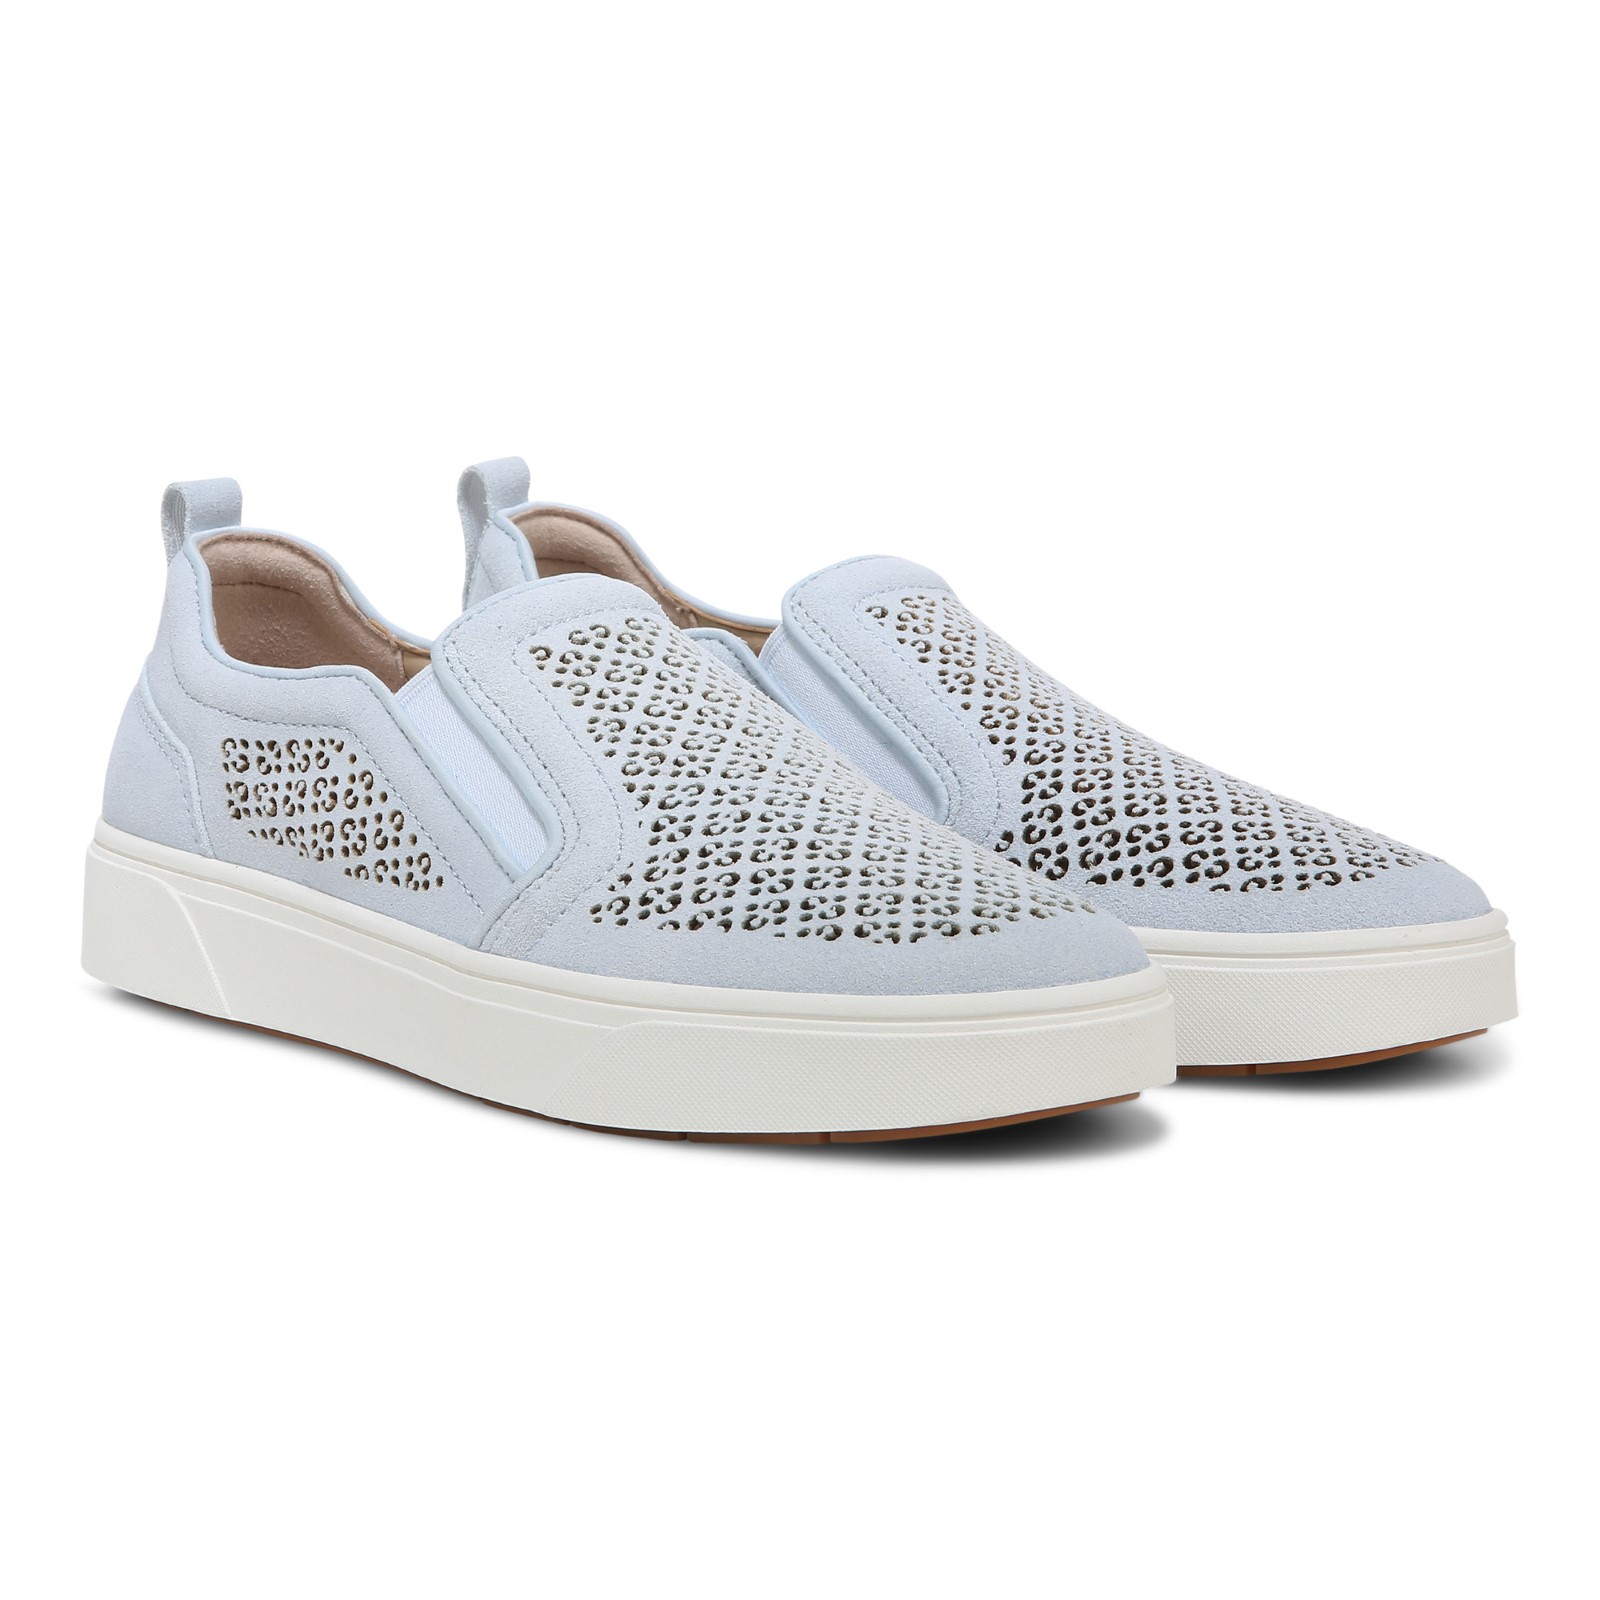 Vionic Kimmie Perf Women's Slip On Supportive Sneaker - Free Shipping